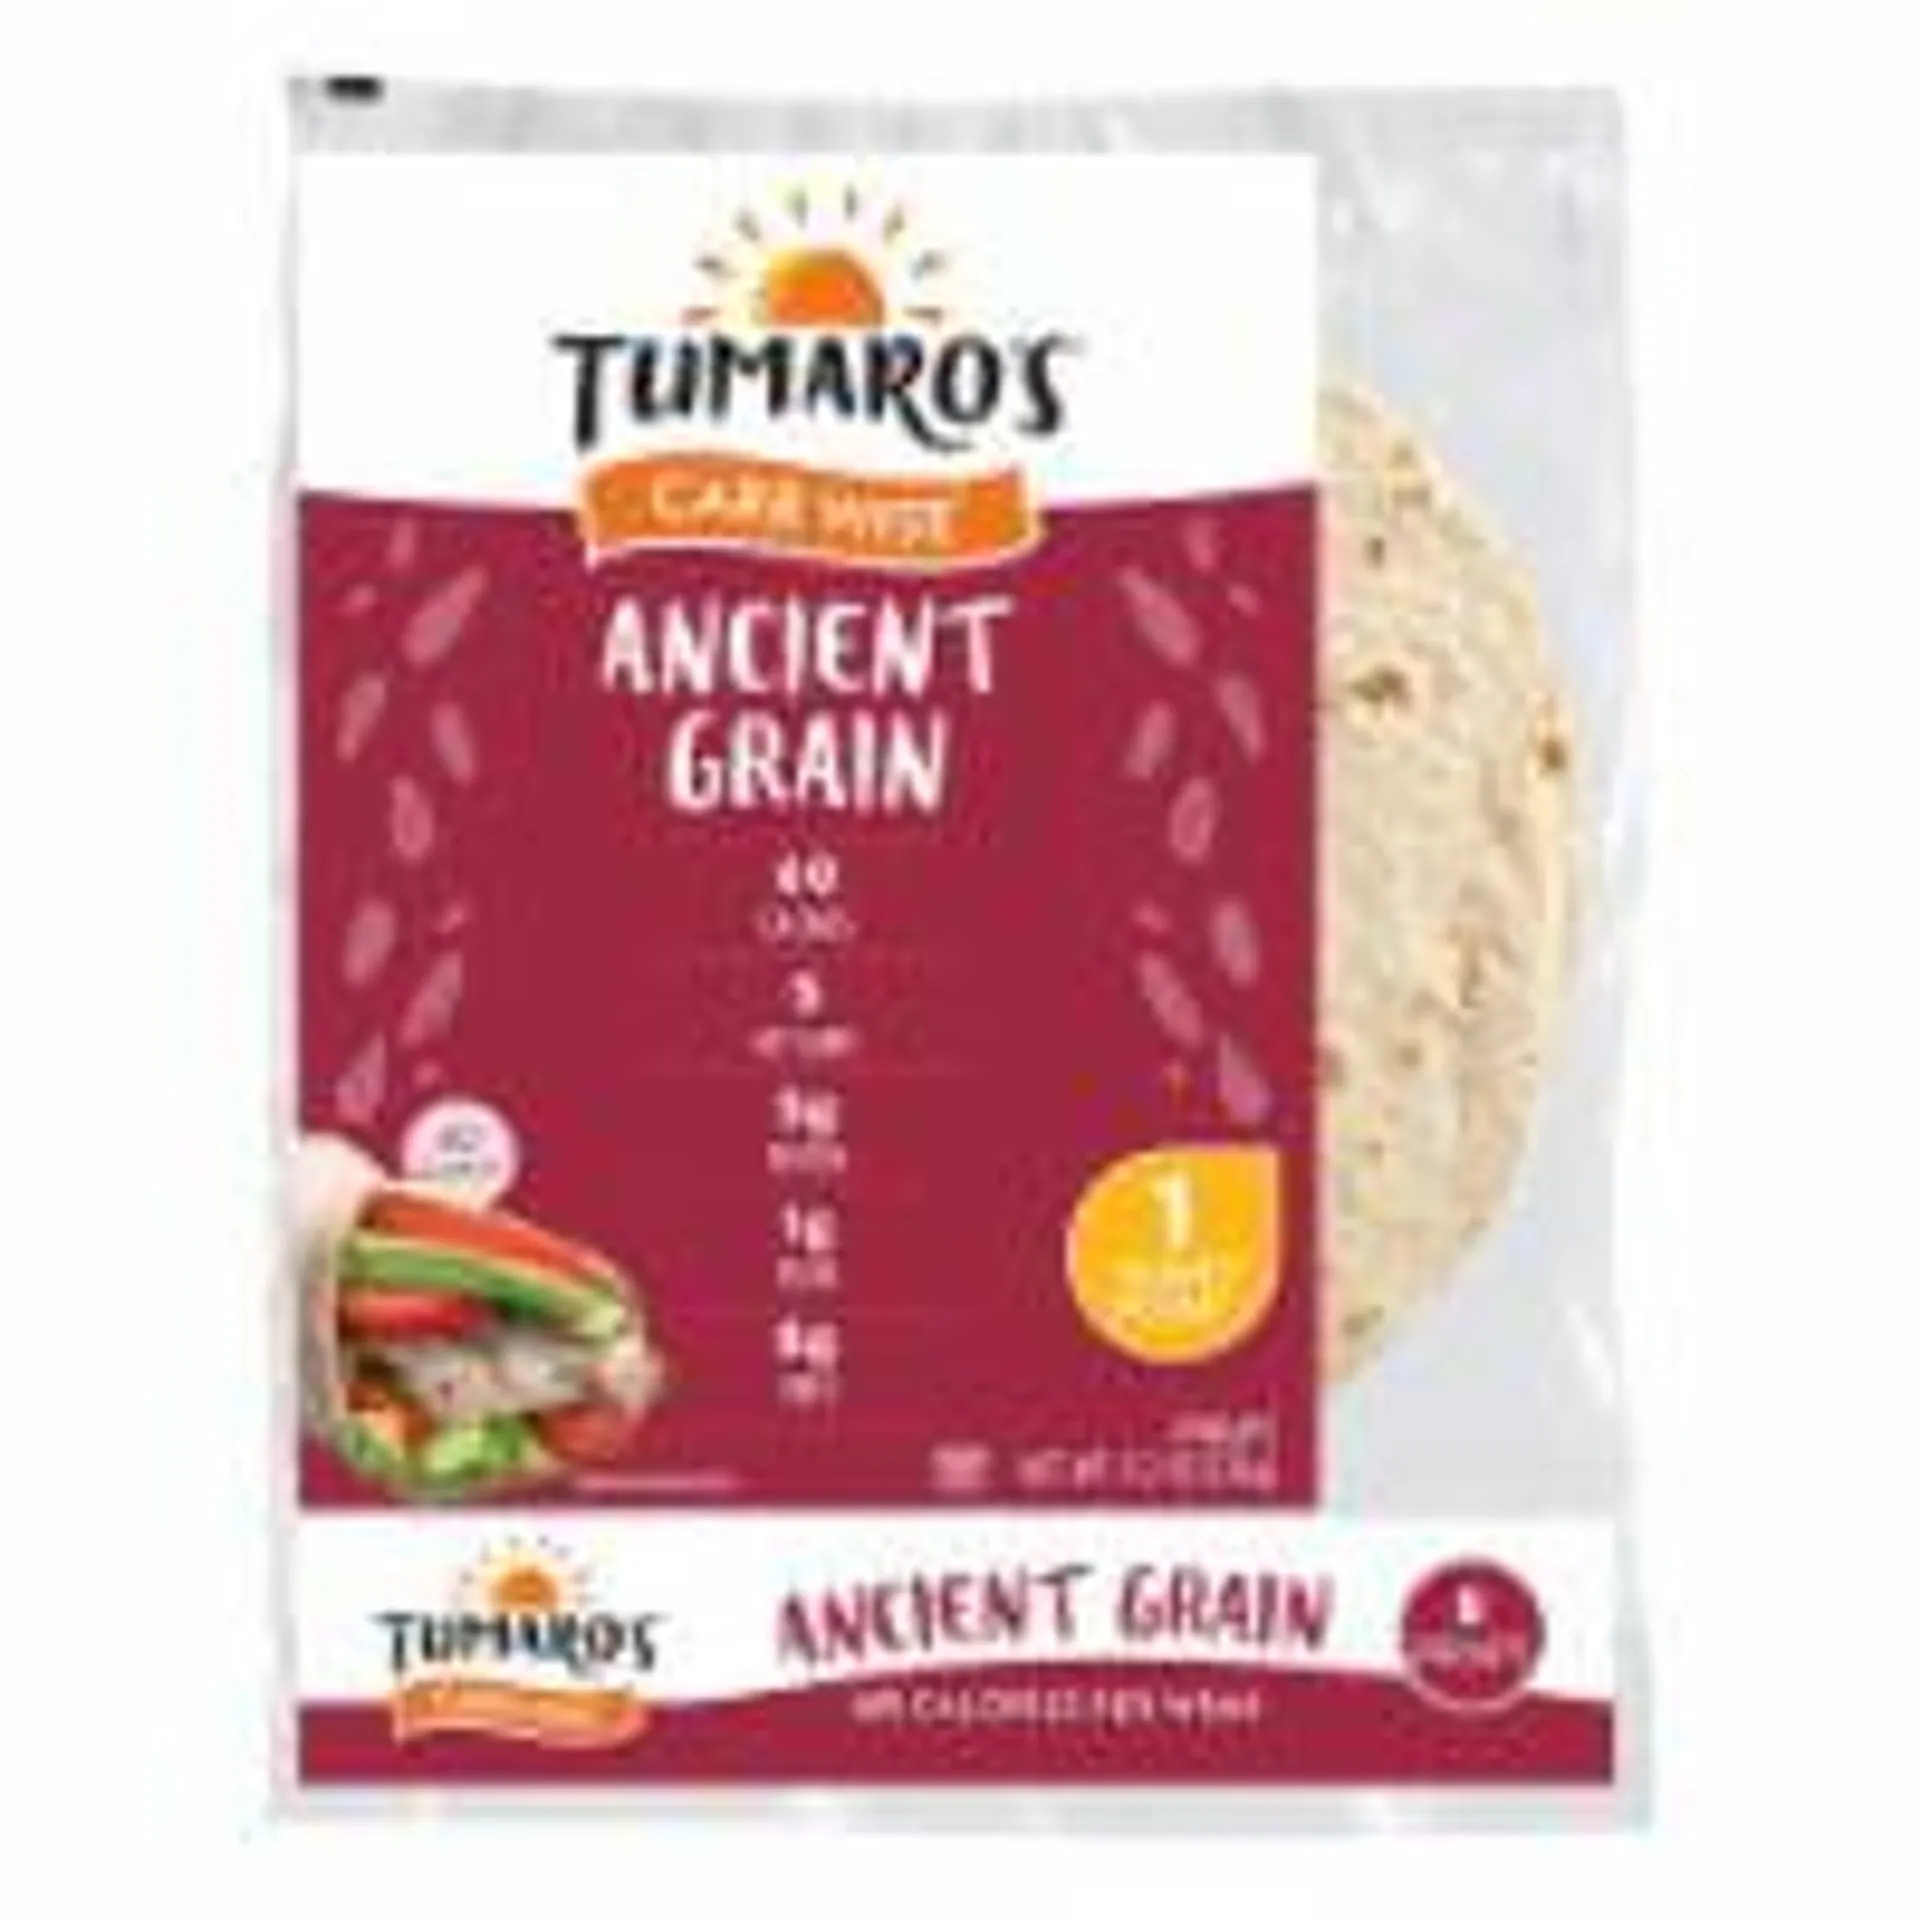 Tumaro'S 8-inch Ancient Grain Carb Wise Wraps - Case of 6 - 8 CT